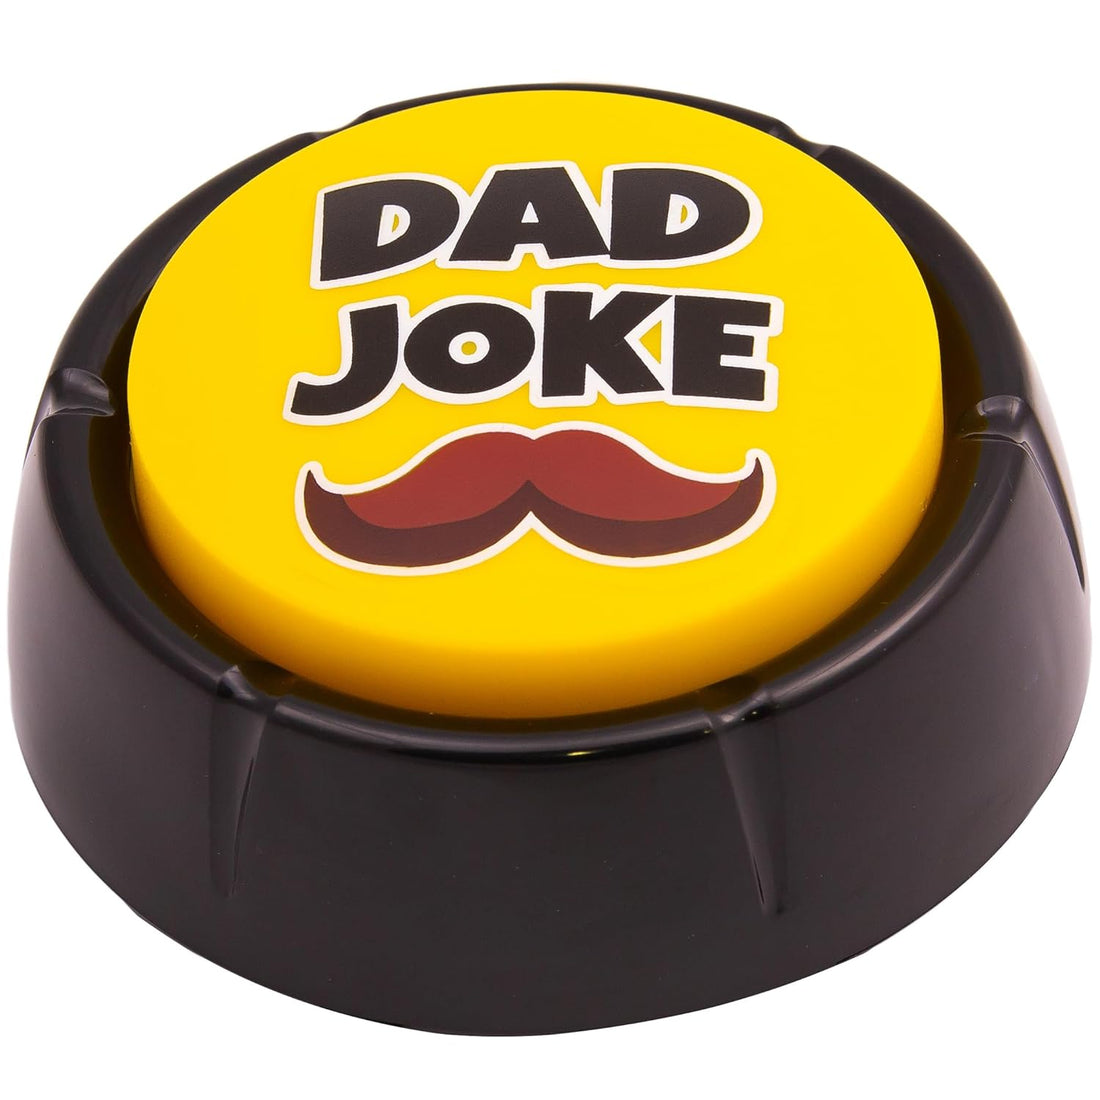 Dad Joke Button | A Gift for Fathers with 50+ Funny Dad Jokes | Novelty Talking Button Present